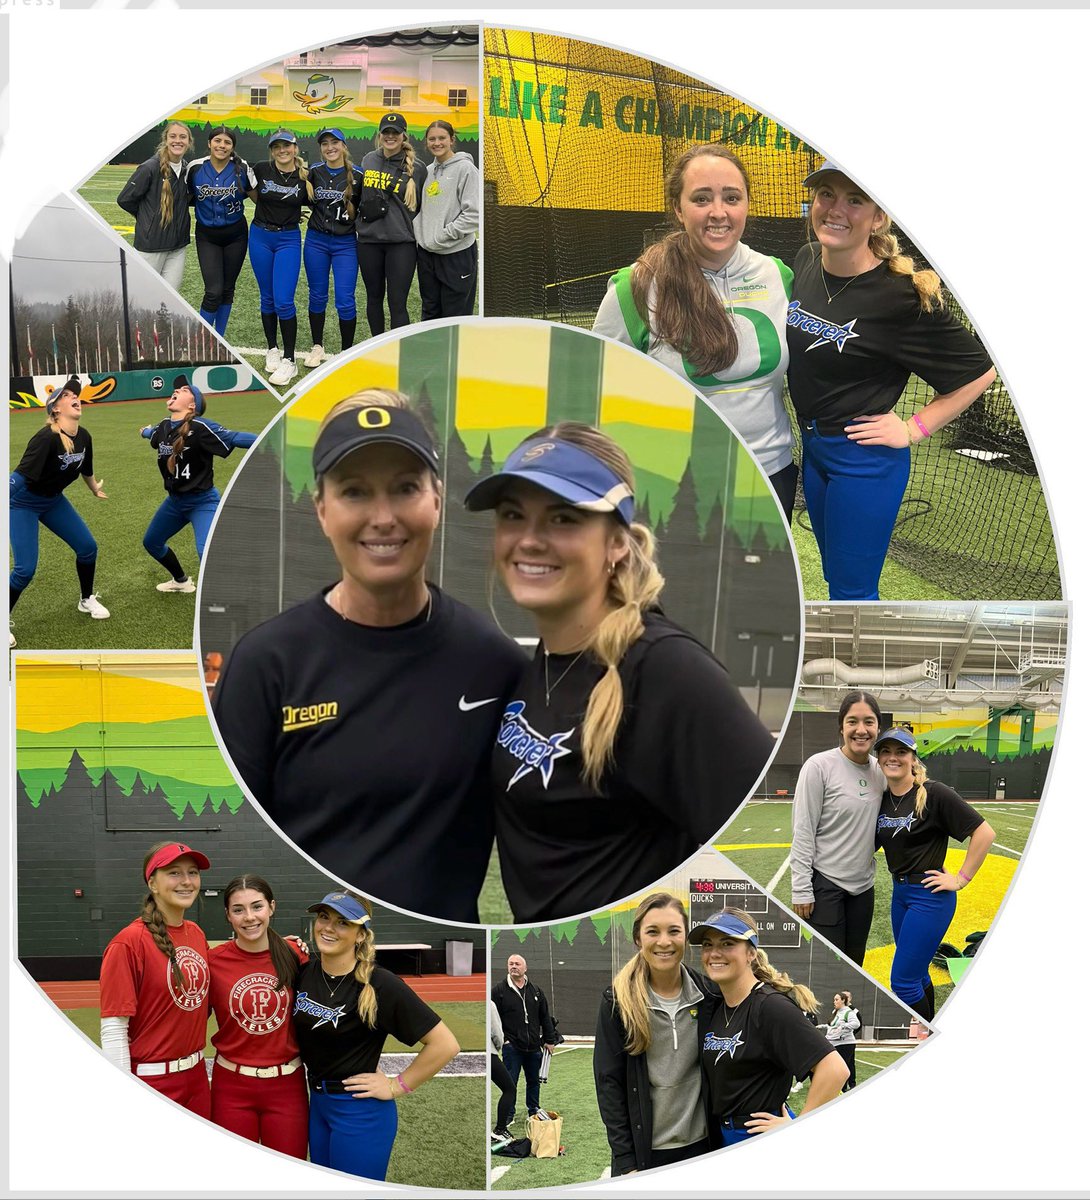 So happy I got to spend the weekend in Eugene! @SorcererSoftbll showed out and I ran into some rivals (besties😁) Thank you @MelyssaLombardi @Sam_Marder @lysssscat32 @syd_syd2 for having me! I love this place and I am so grateful for my time with you! 🫶 See you soon! 💚💛🦆